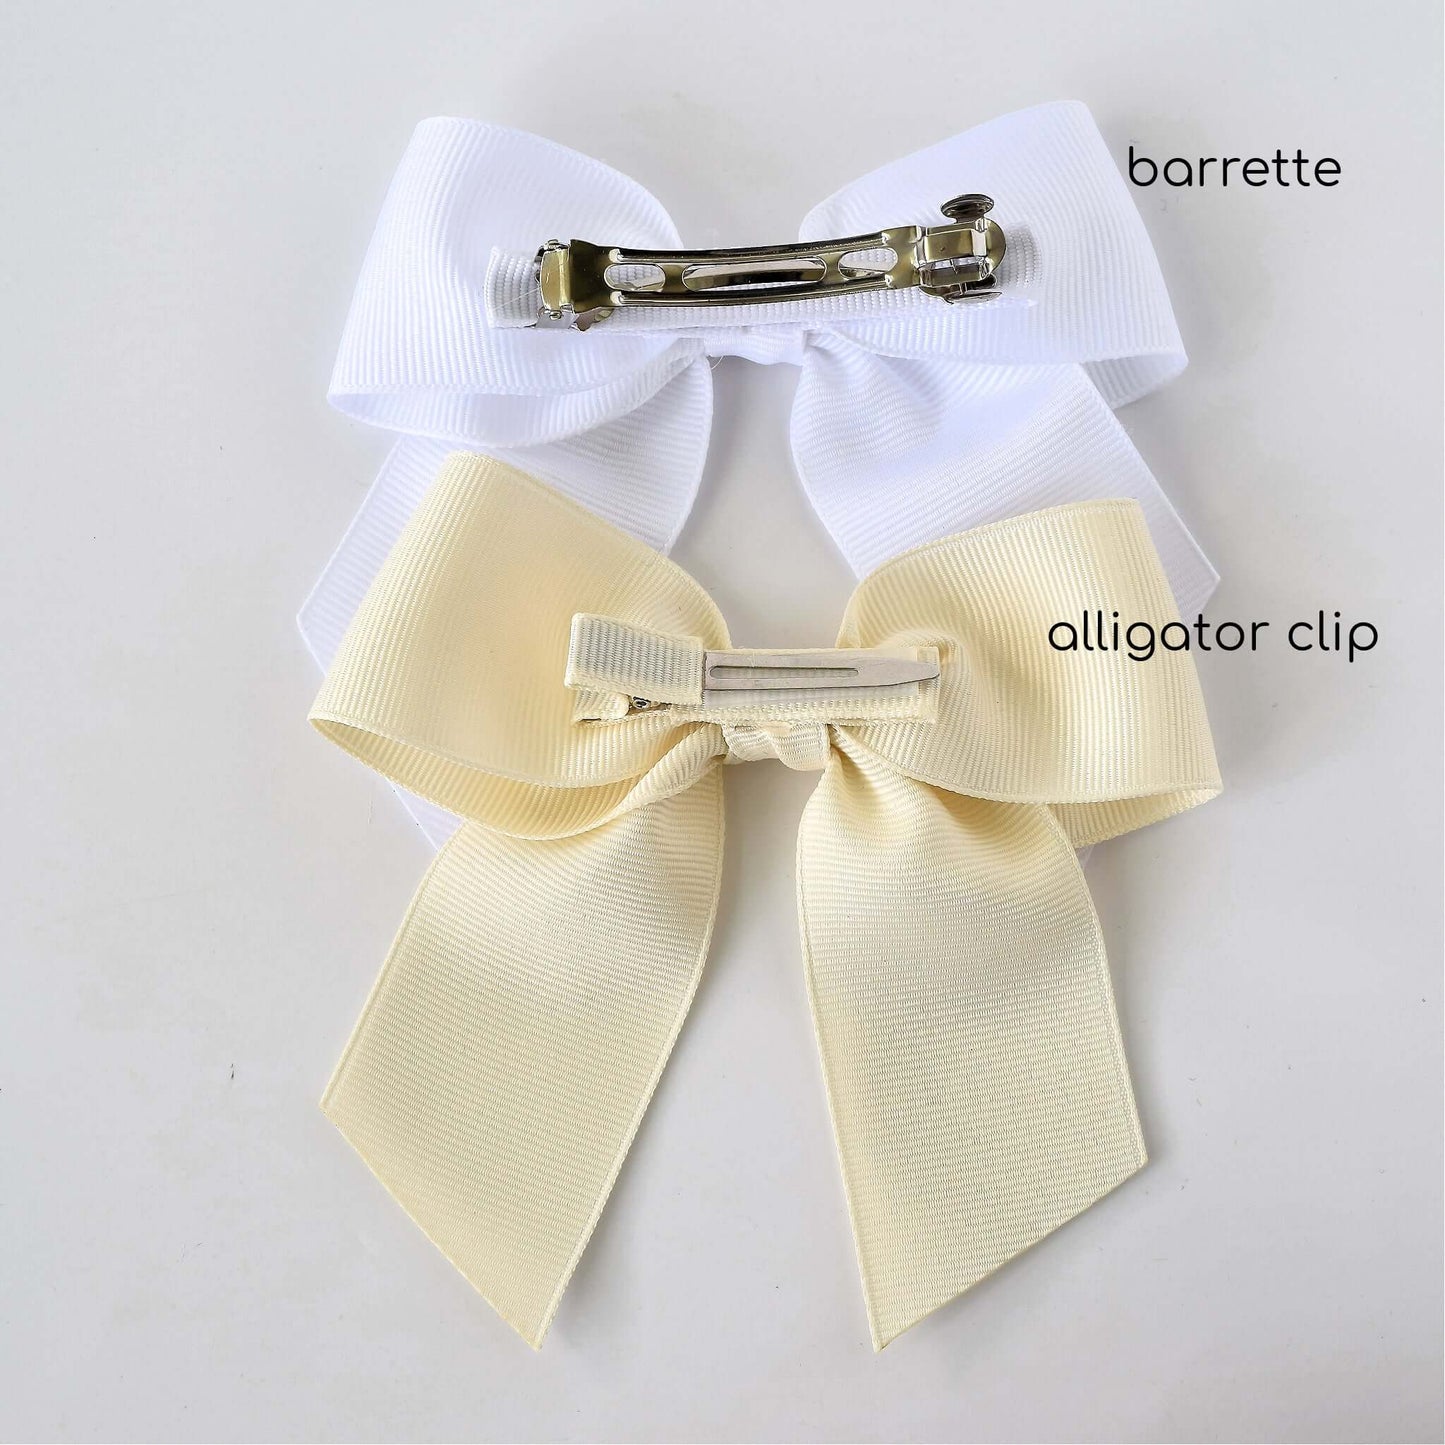 White and ivory grosgrain sailor bows with barrette and alligator clip options for toddlers and girls